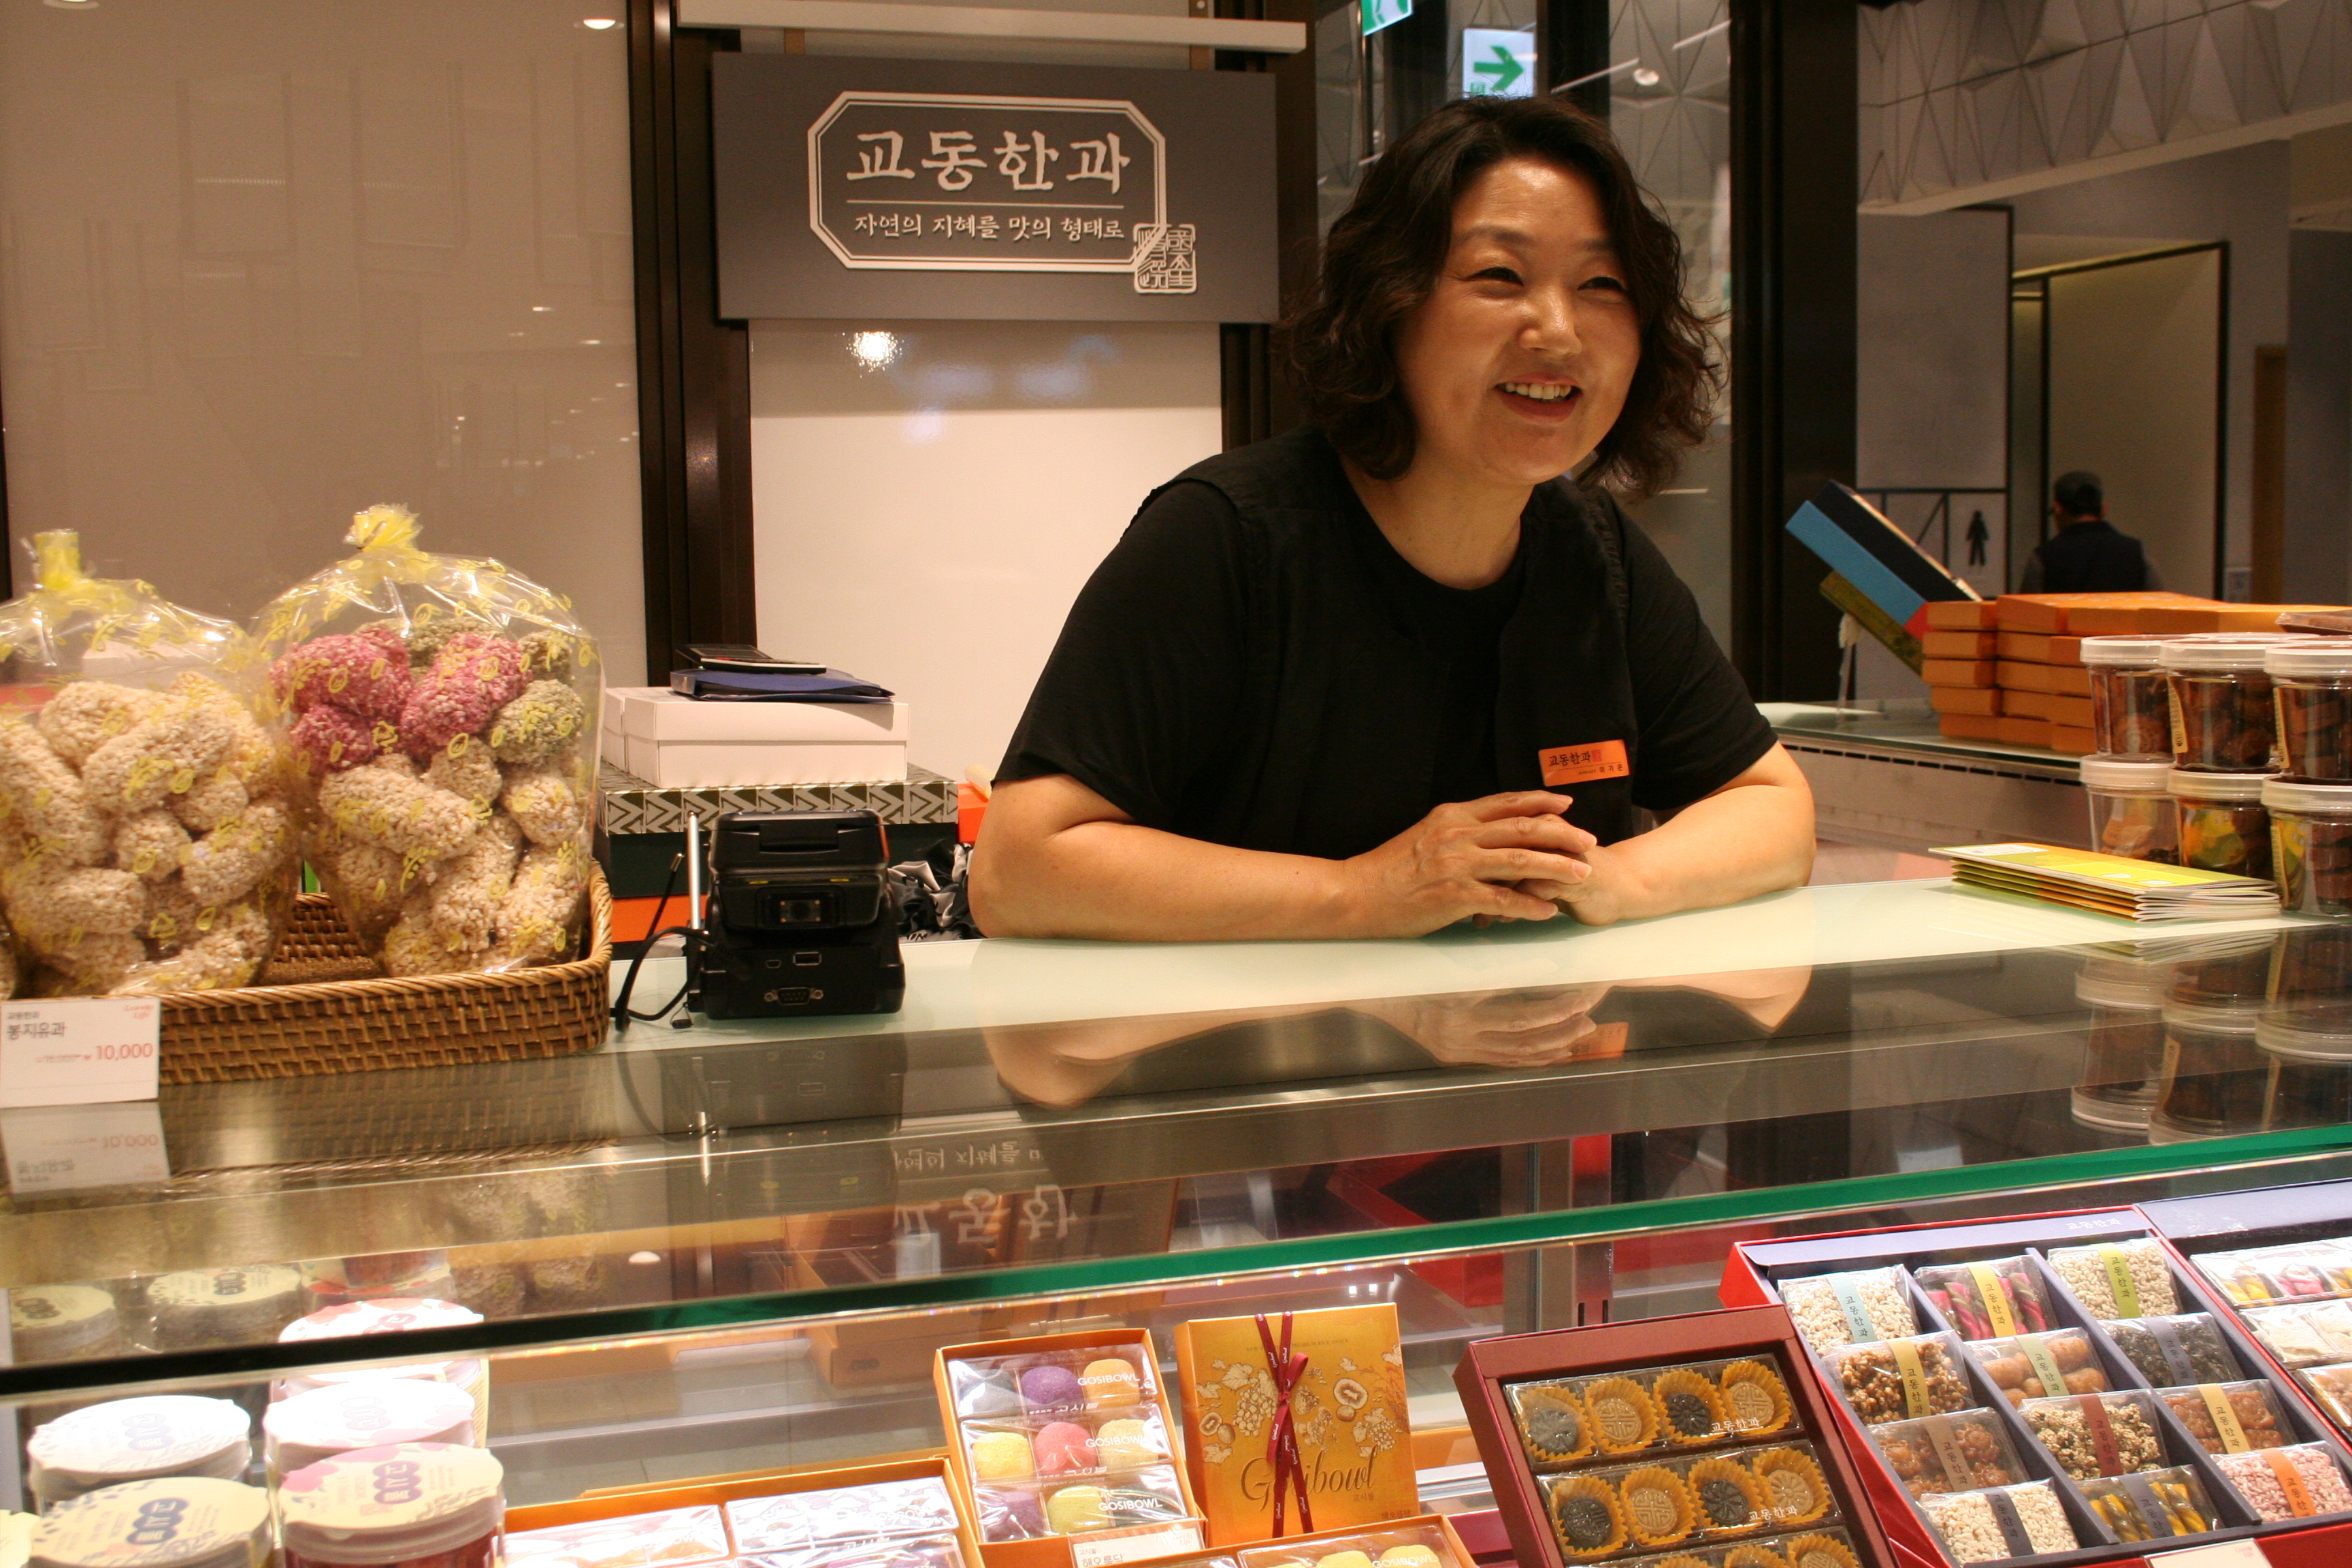 A worker serves customers at Gyodong, a small shop selling traditional Korean delicacies at the Lotte Department Store in Jamsil, Seoul, South Korea. (Caroline Wong)